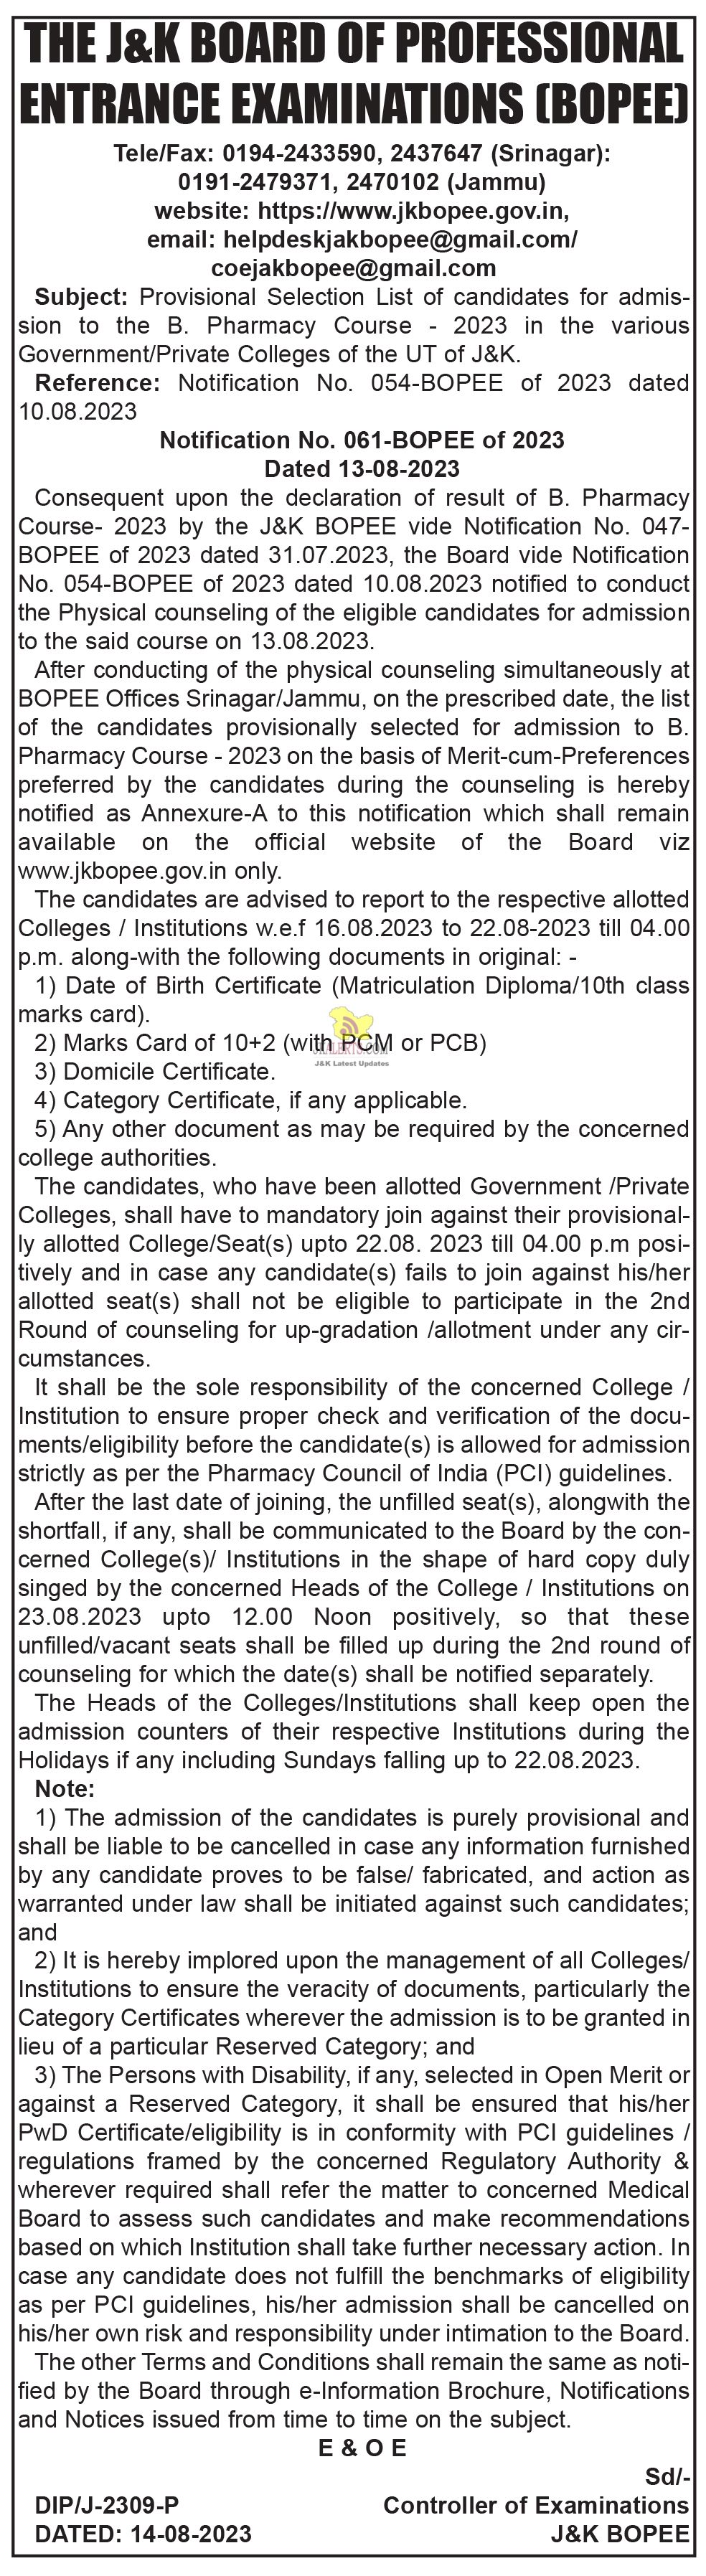 JKBOPEE Selection List for admission to the B. Pharmacy Course 2023.